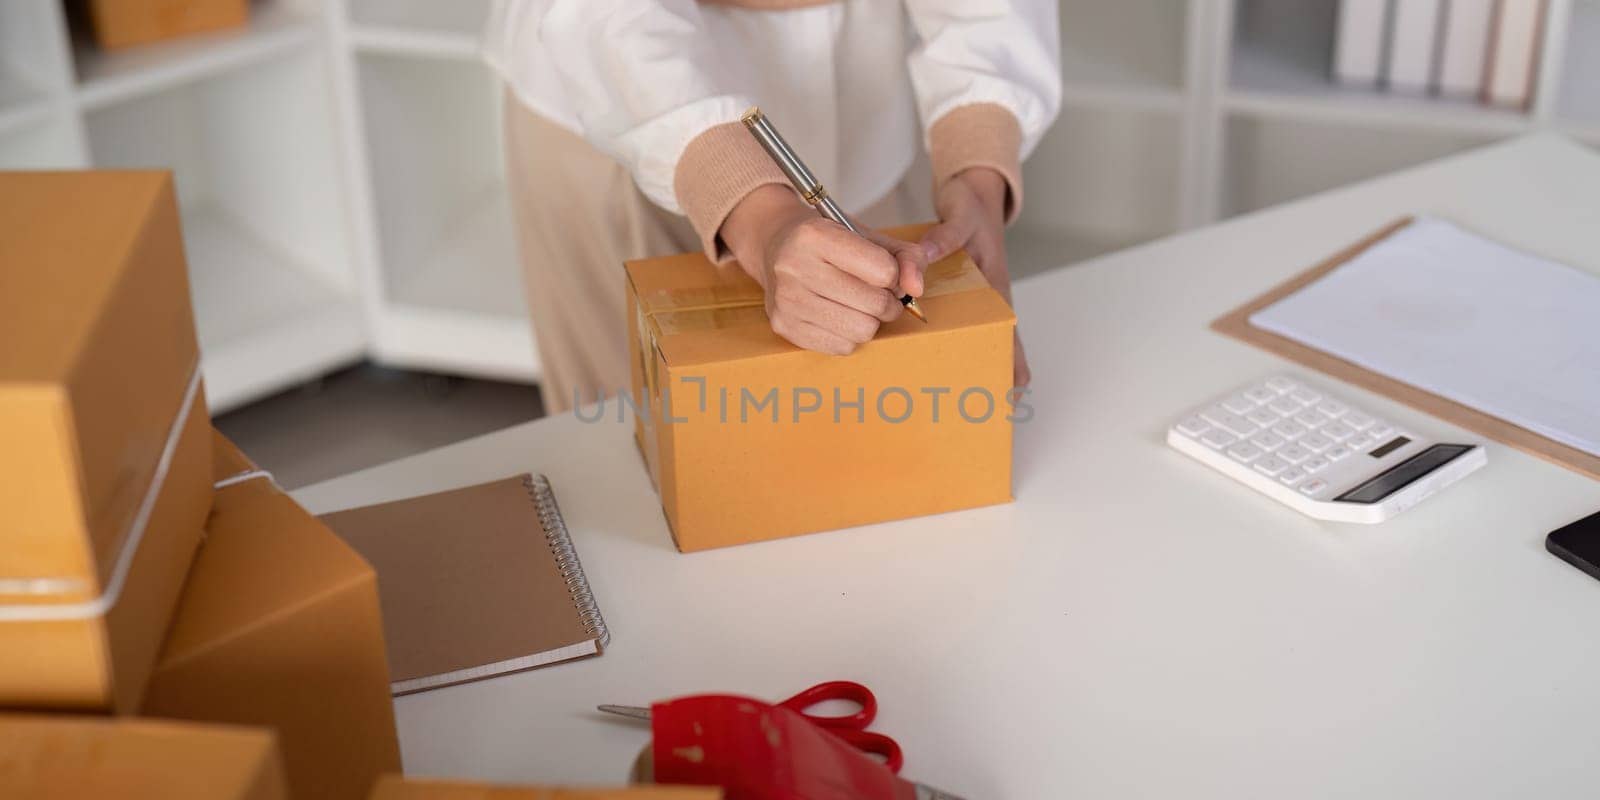 Woman is writing a list of customer on paper before shipping to them, she runs an ecommerce business on websites and social media. Concept of selling products online by nateemee